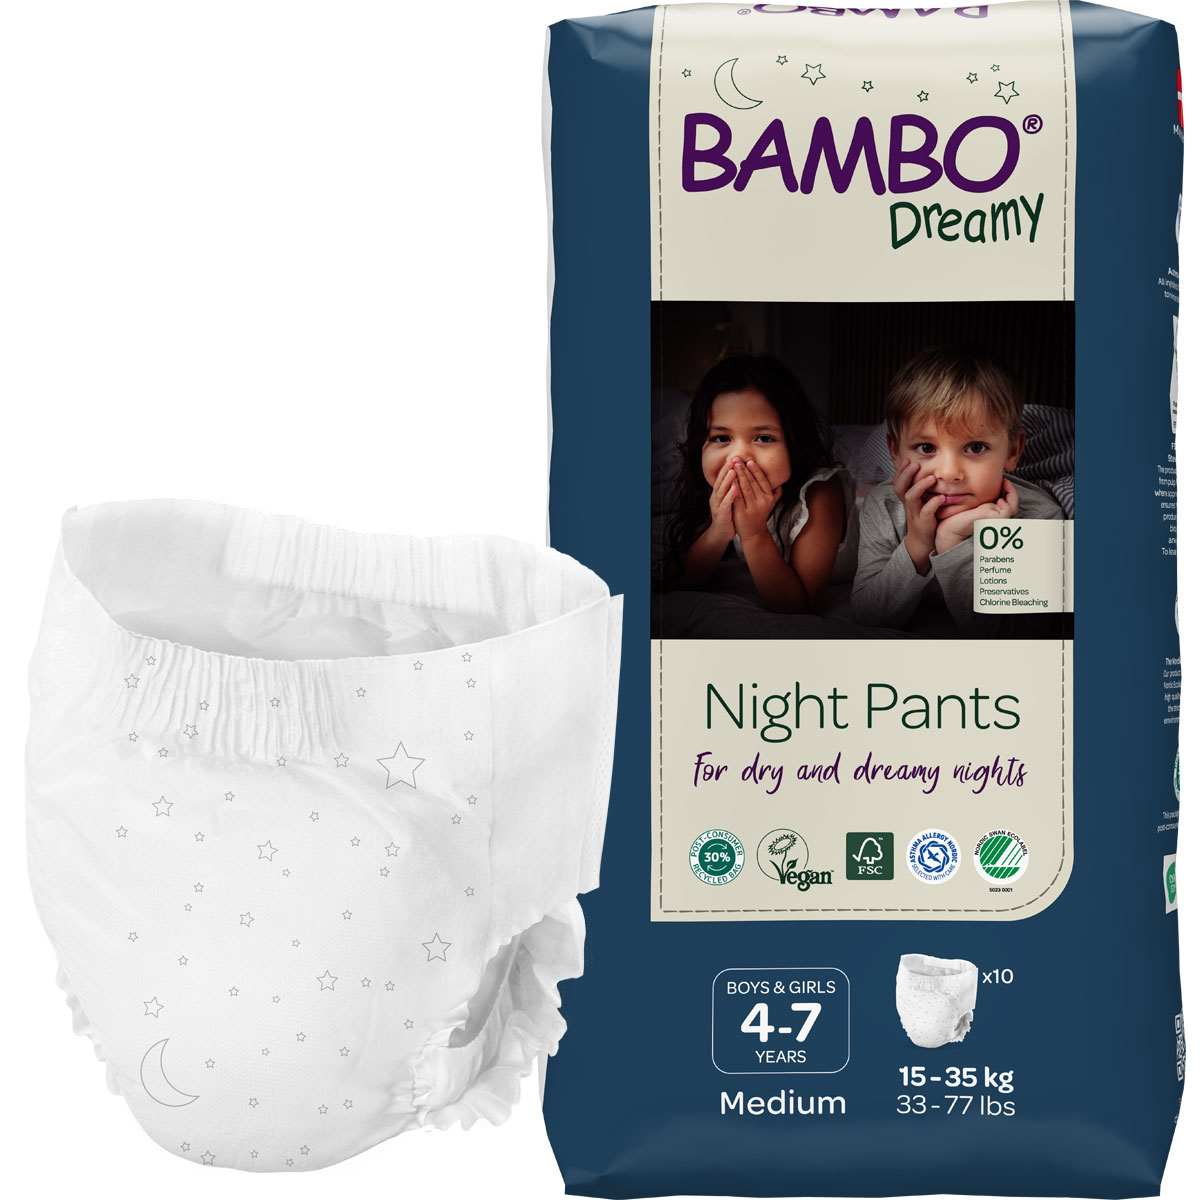 Bambo Dreamy - Night Pants unisex - 4 bis 7 Jahre (15-35 kg) - 10 St. Pack